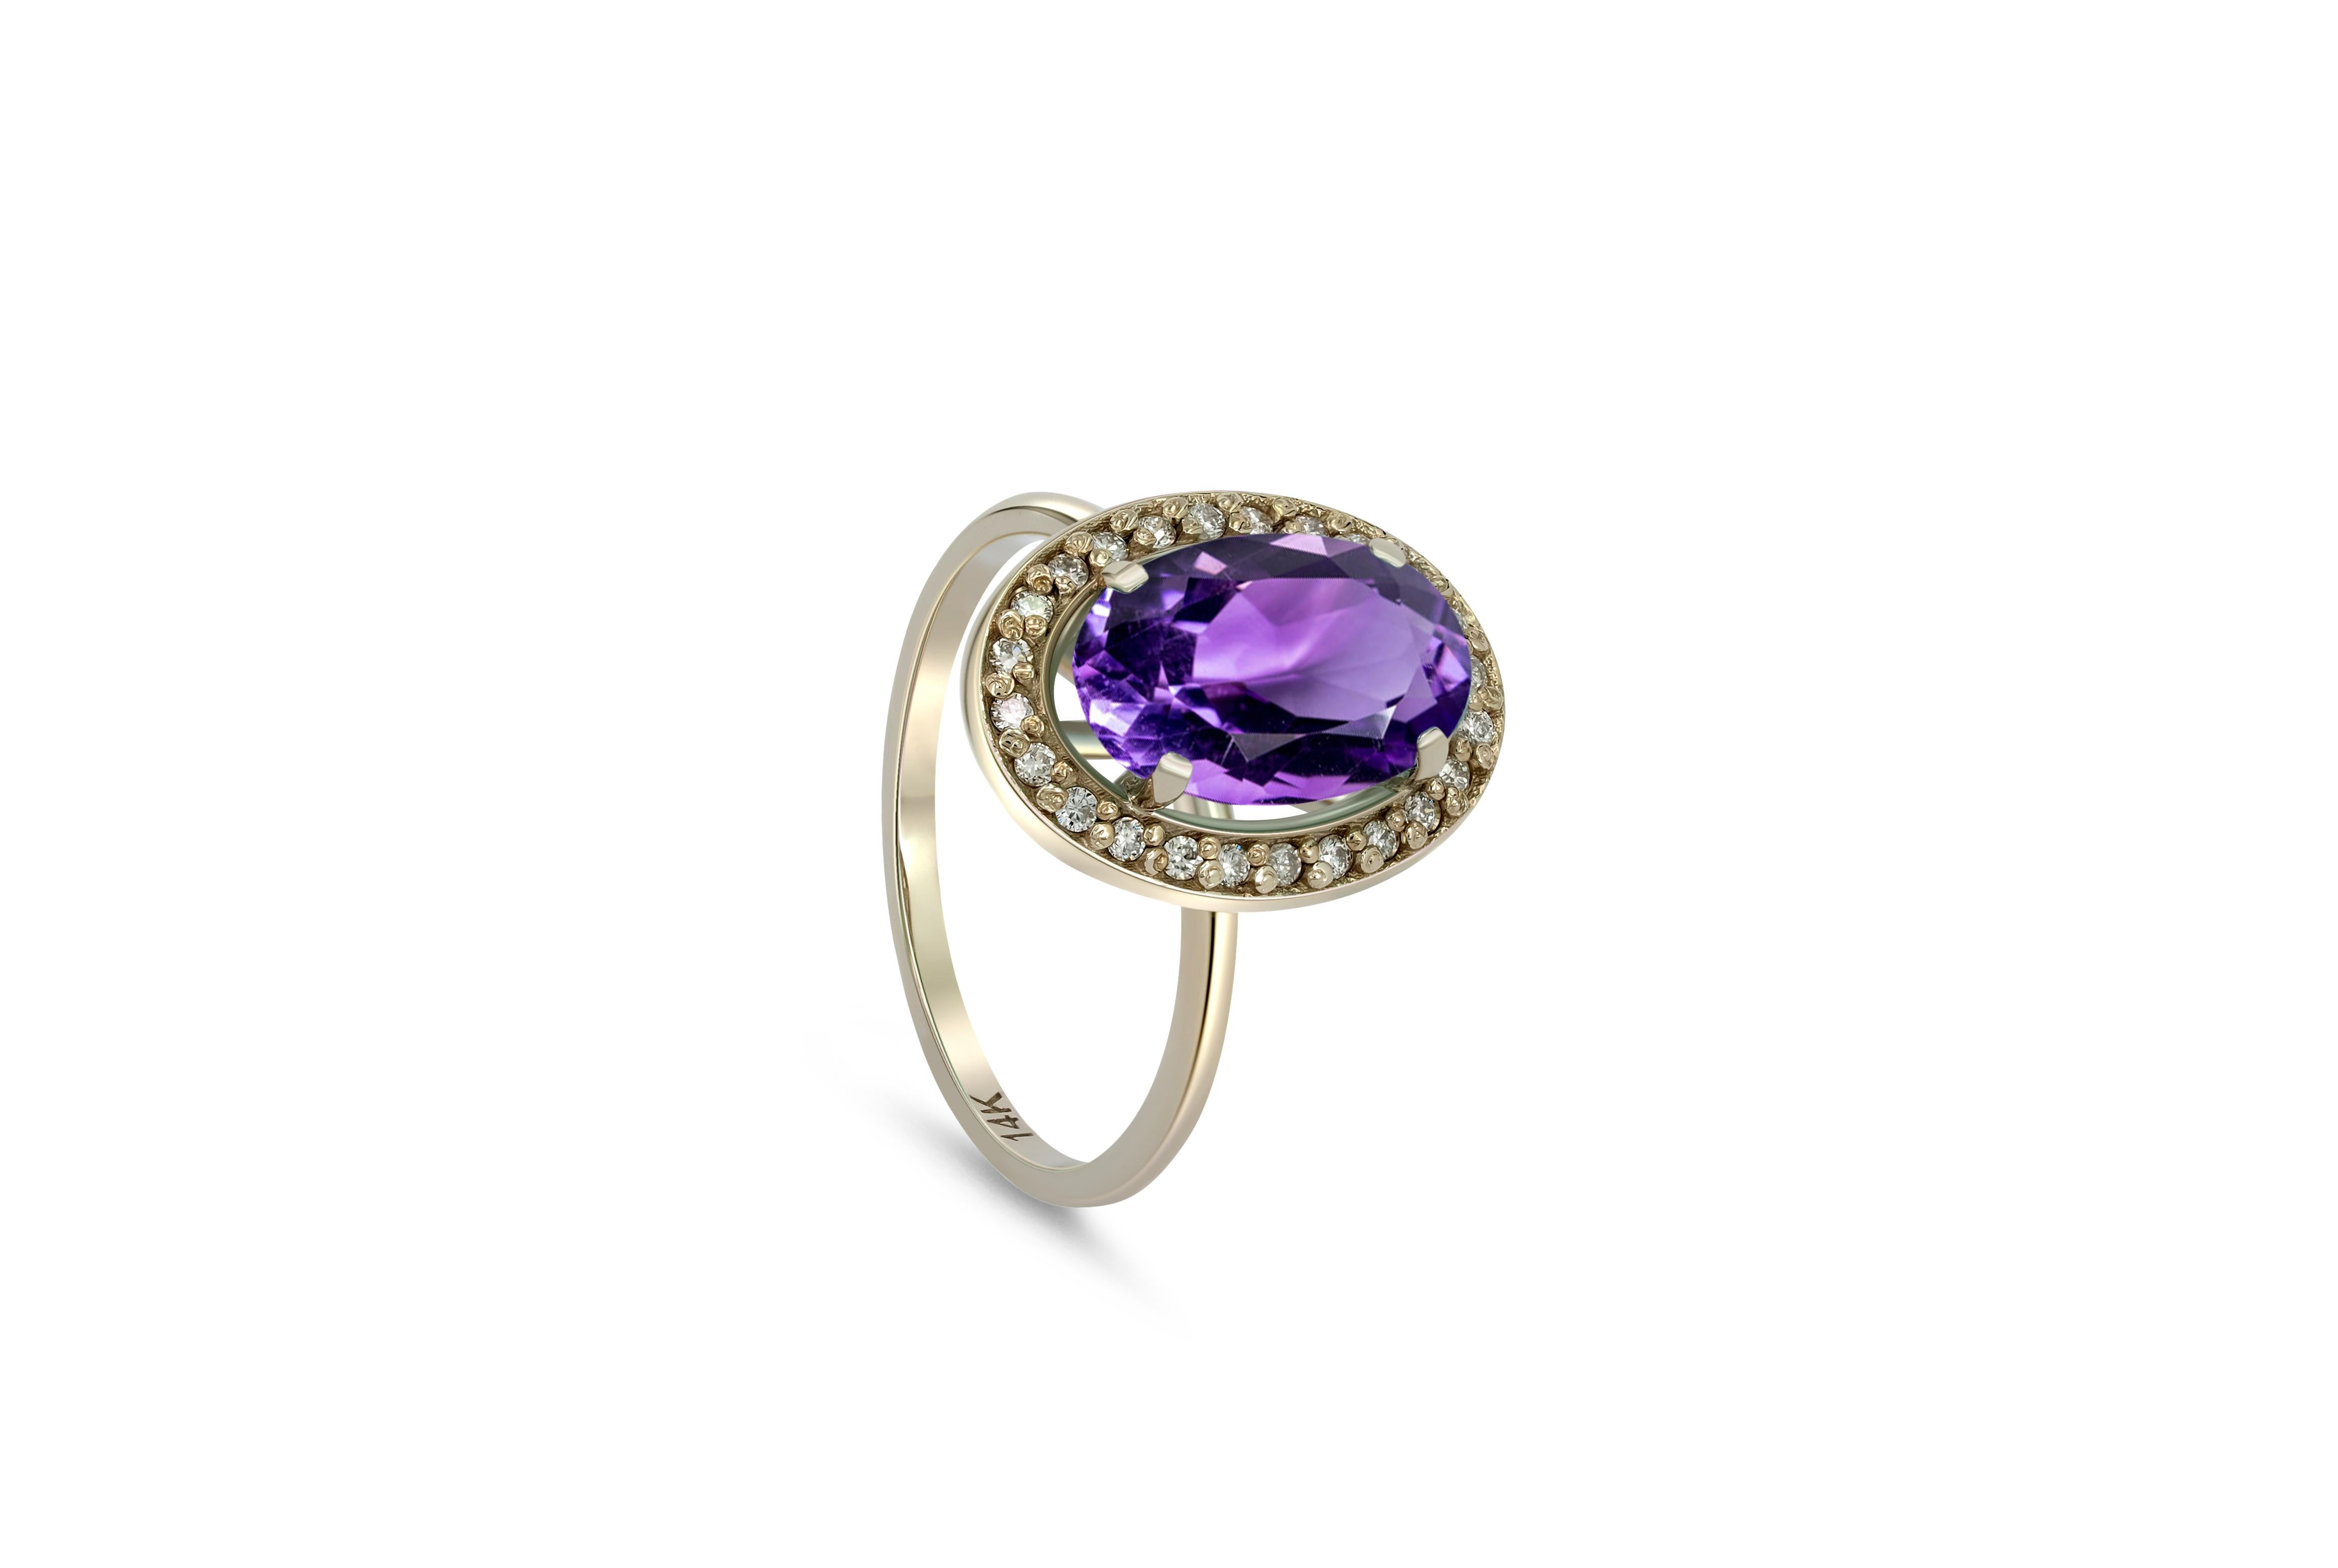 Amethyst and diamonds 14k gold ring. 
Oval Amethyst gold ring. Amethyst diamond halo ring. Purple gemstone ring.

Metal: 14k gold
Weight: 3 gr depends from size

Gemstones:
Amethyst - 1 piece
Cut - oval
Color - purple
Weight - 3-3.2 ct

Side